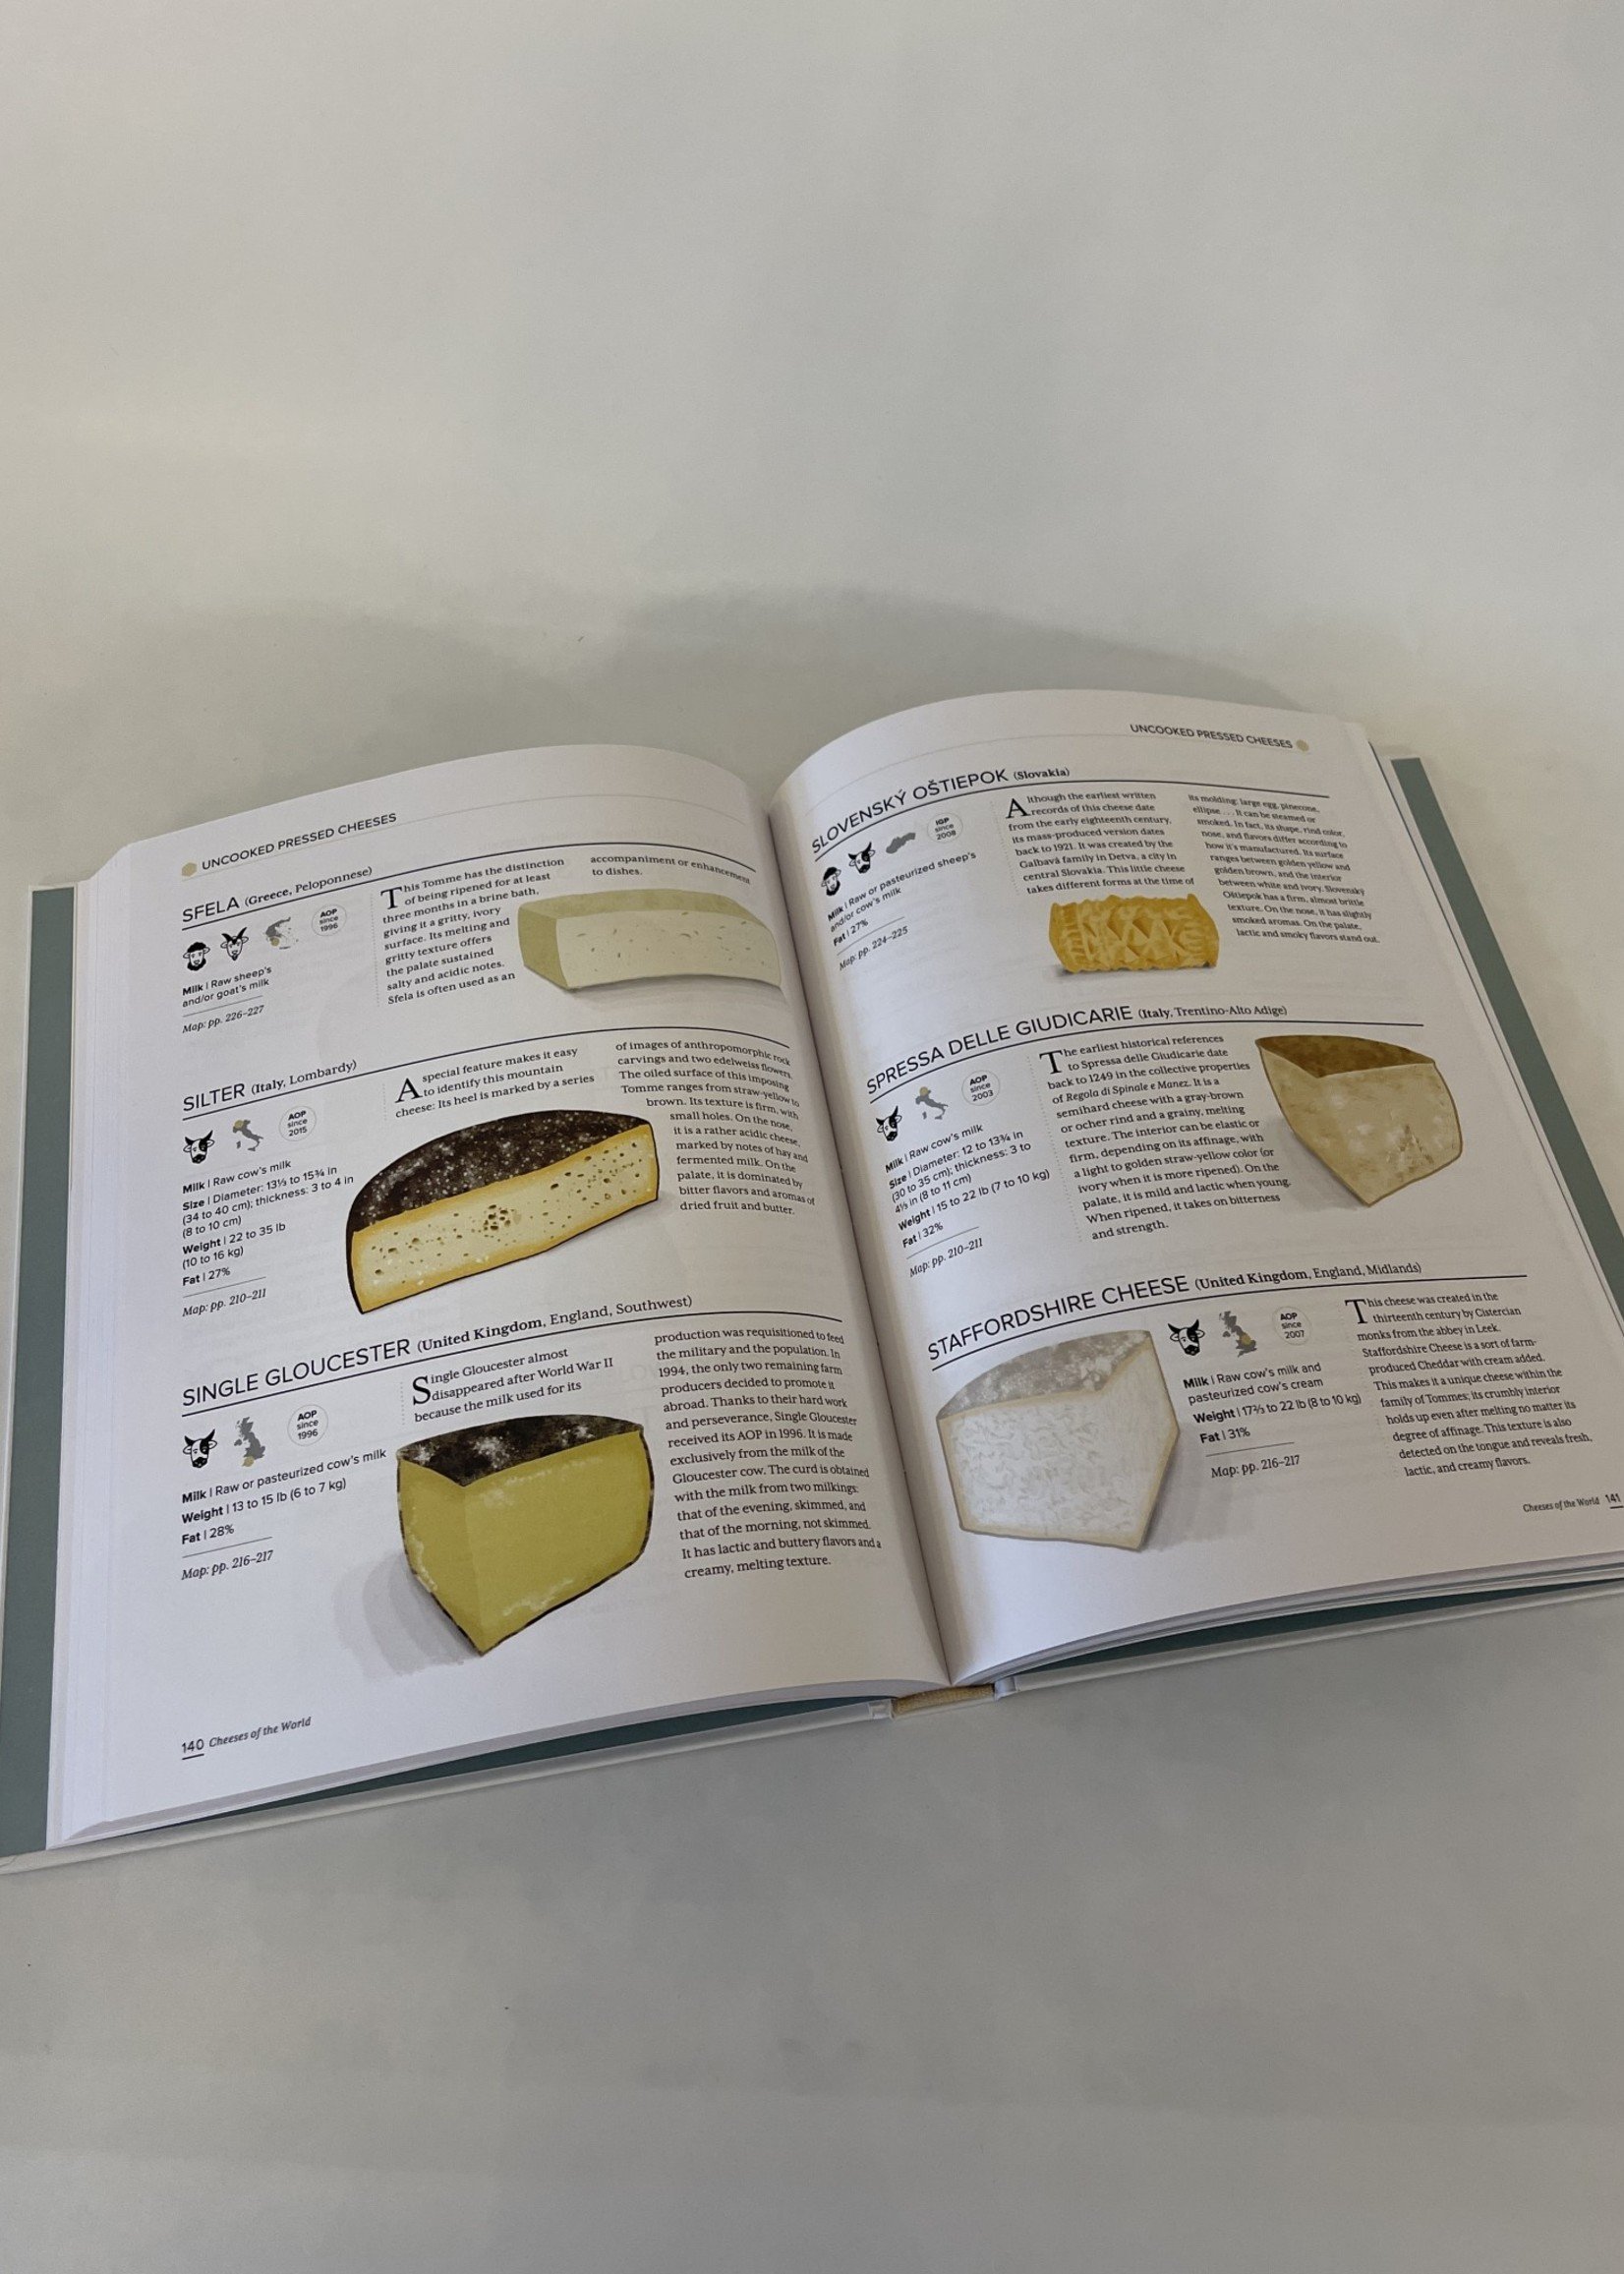 Taschen Books Field Guide to Cheese